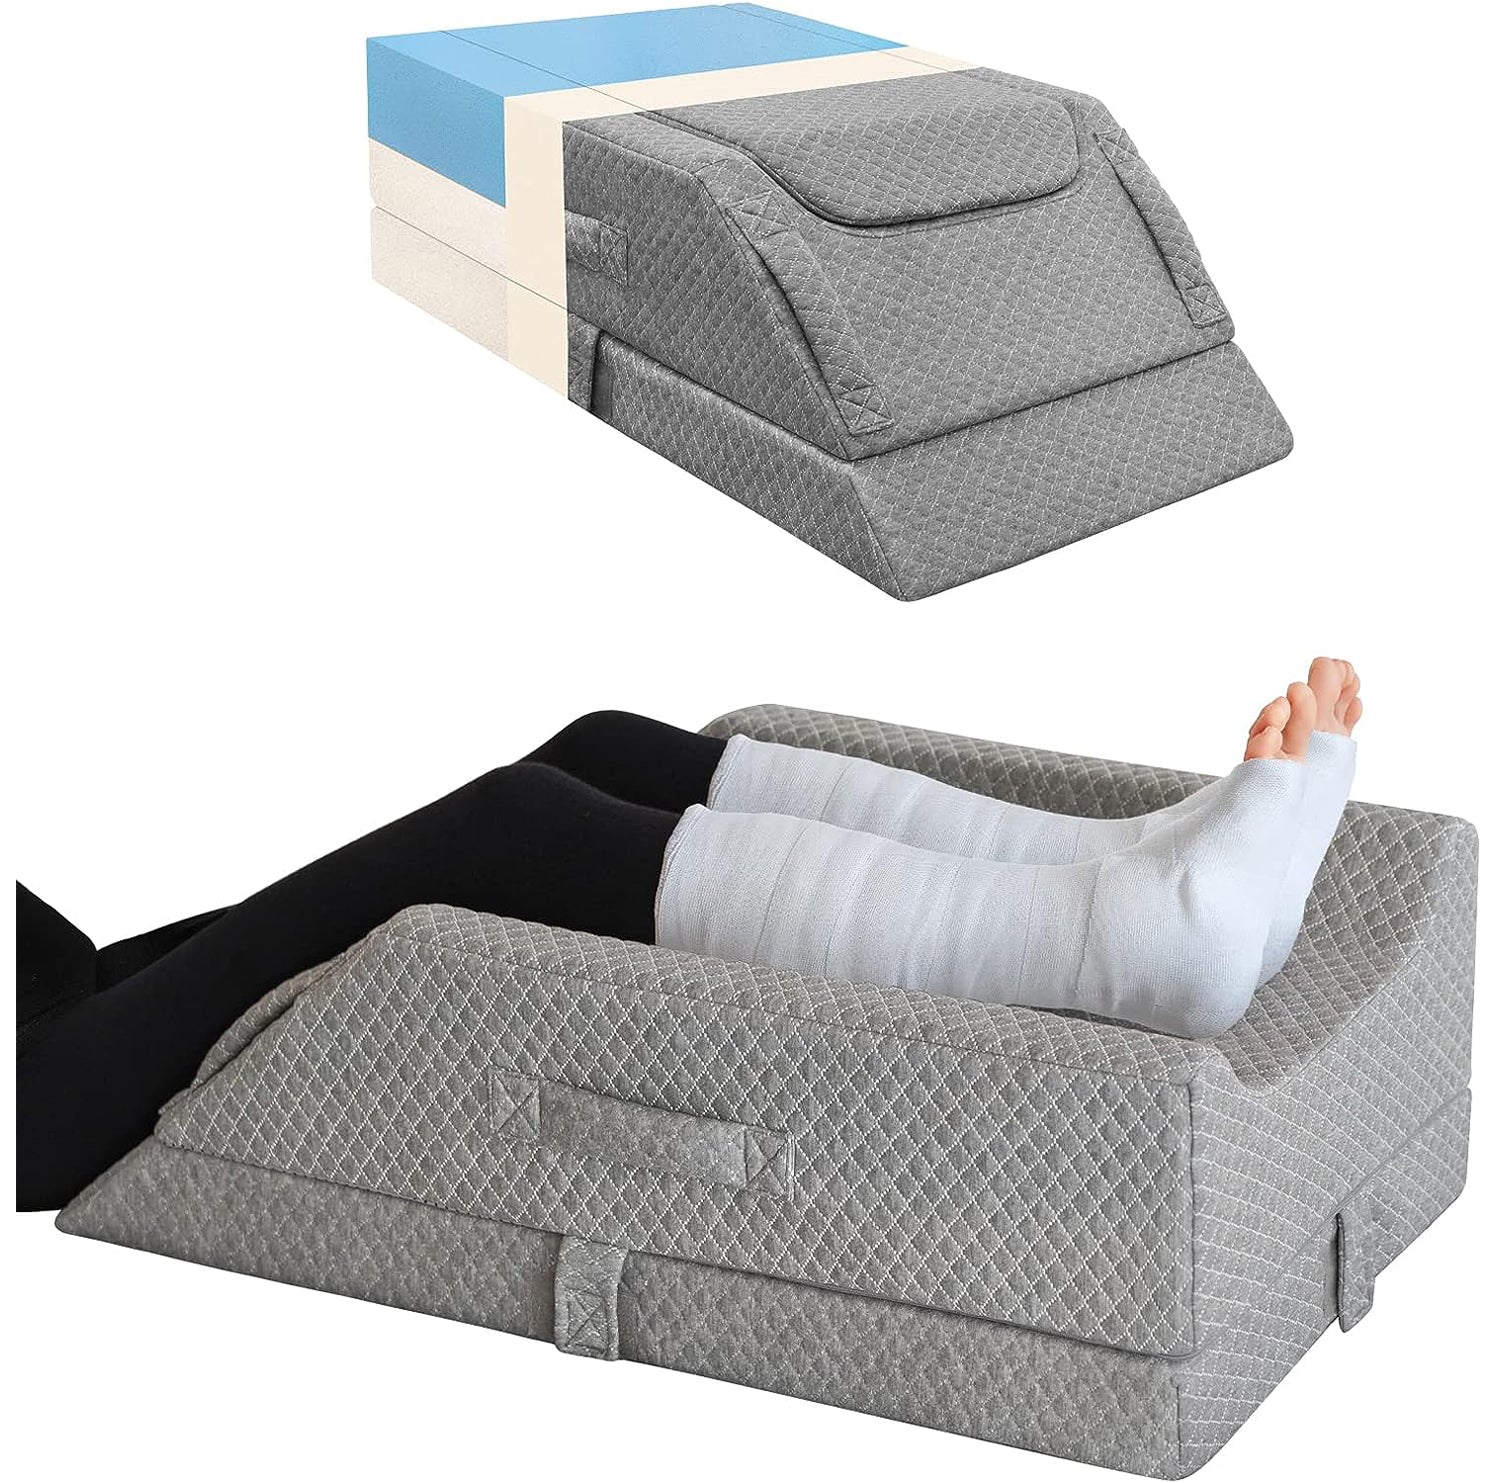 Leg Elevation Wedge Pillow for Sleeping, After Surgery, Memory Foam